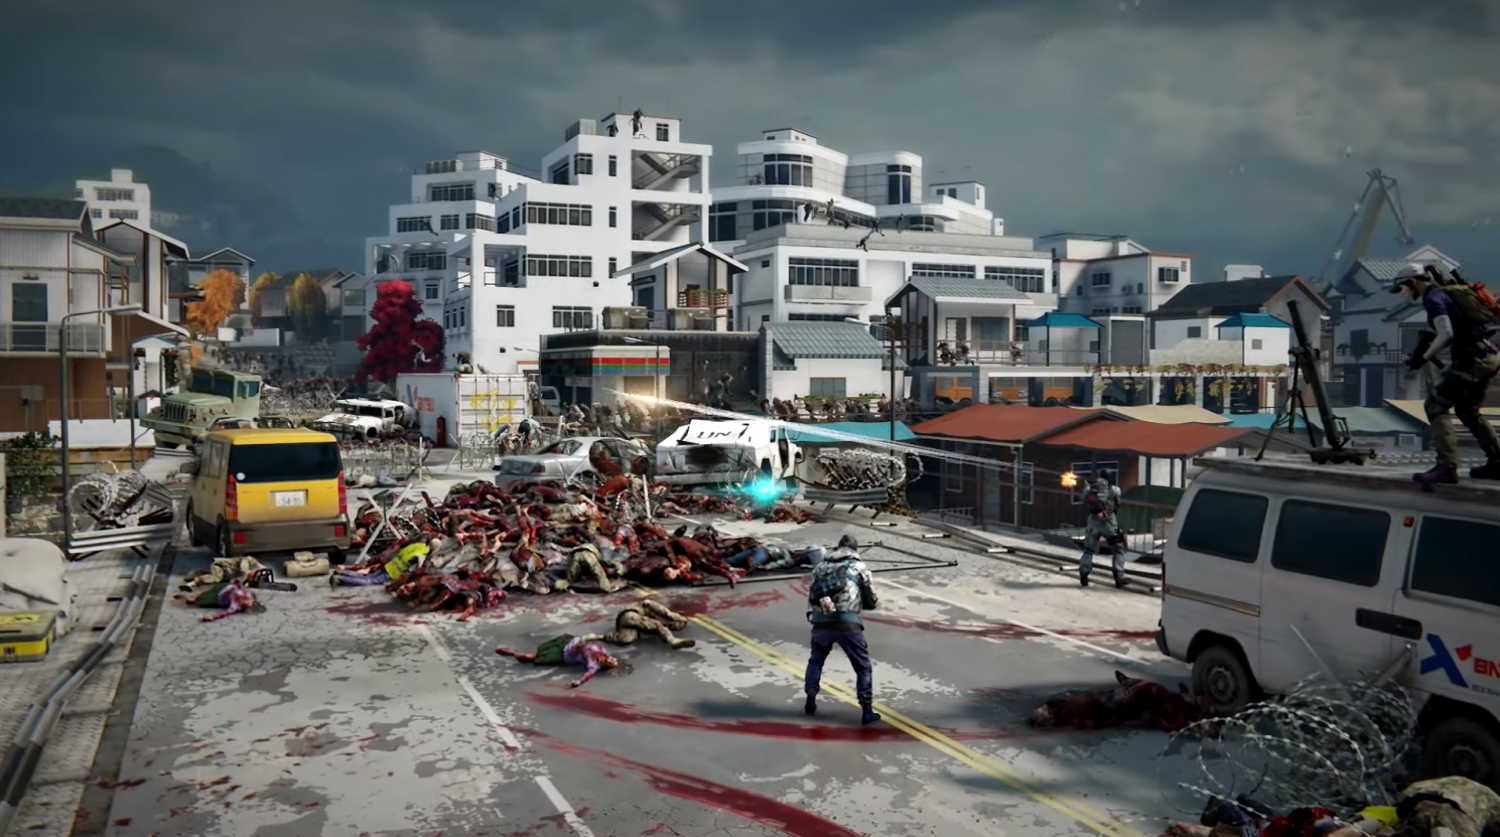 World War Z update adds PS4/Xbox One/PC Crossplay support, Dronemaster  class added